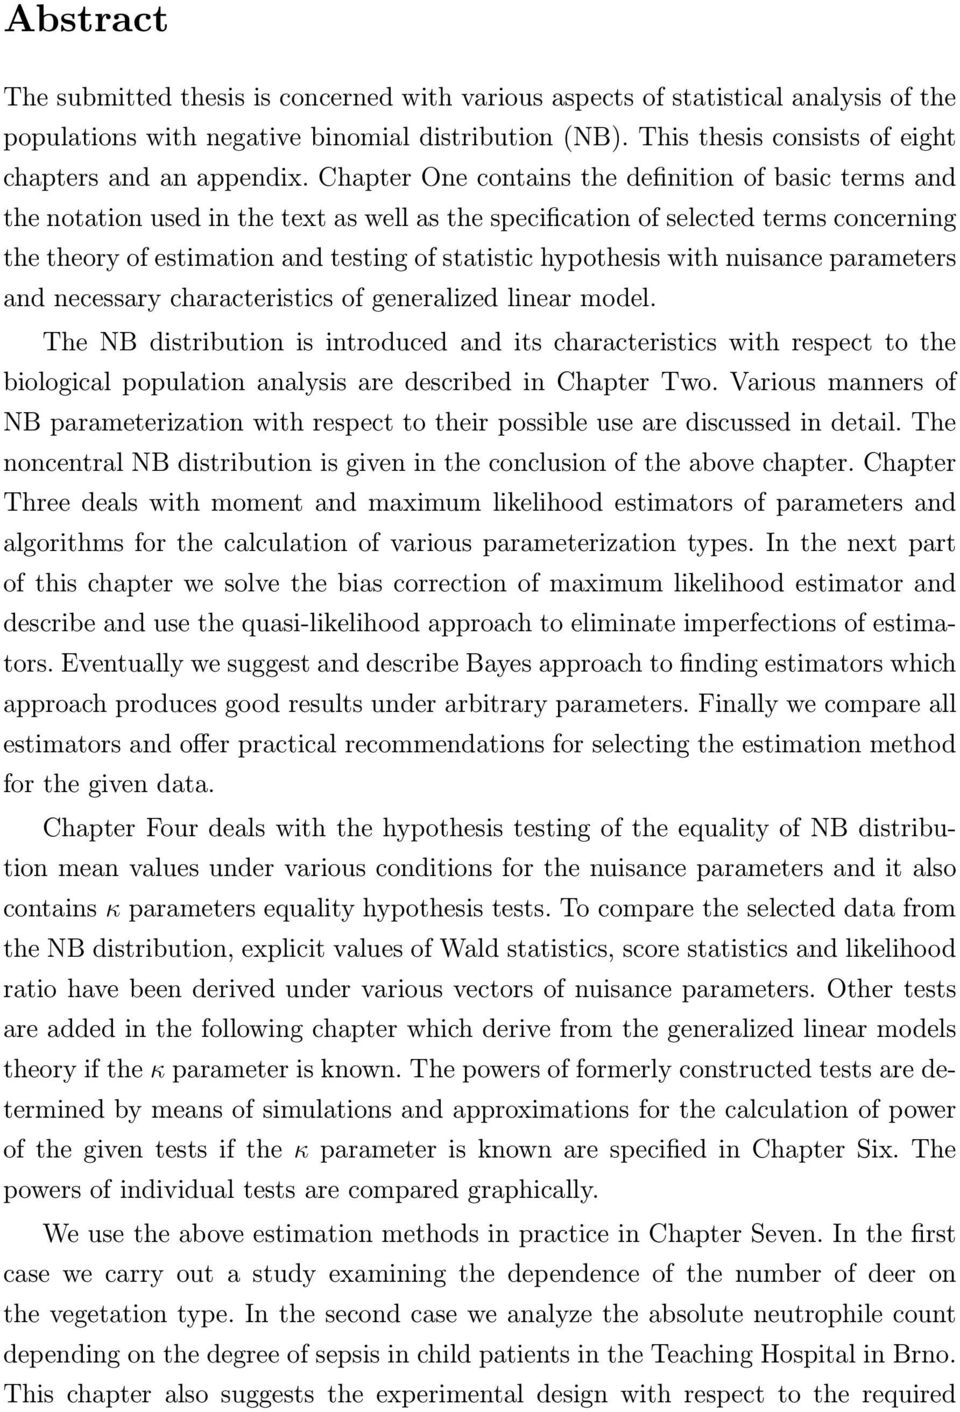 Chapter One contains the definition of basic terms and the notation used in the text as well as the specification of selected terms concerning the theory of estimation and testing of statistic